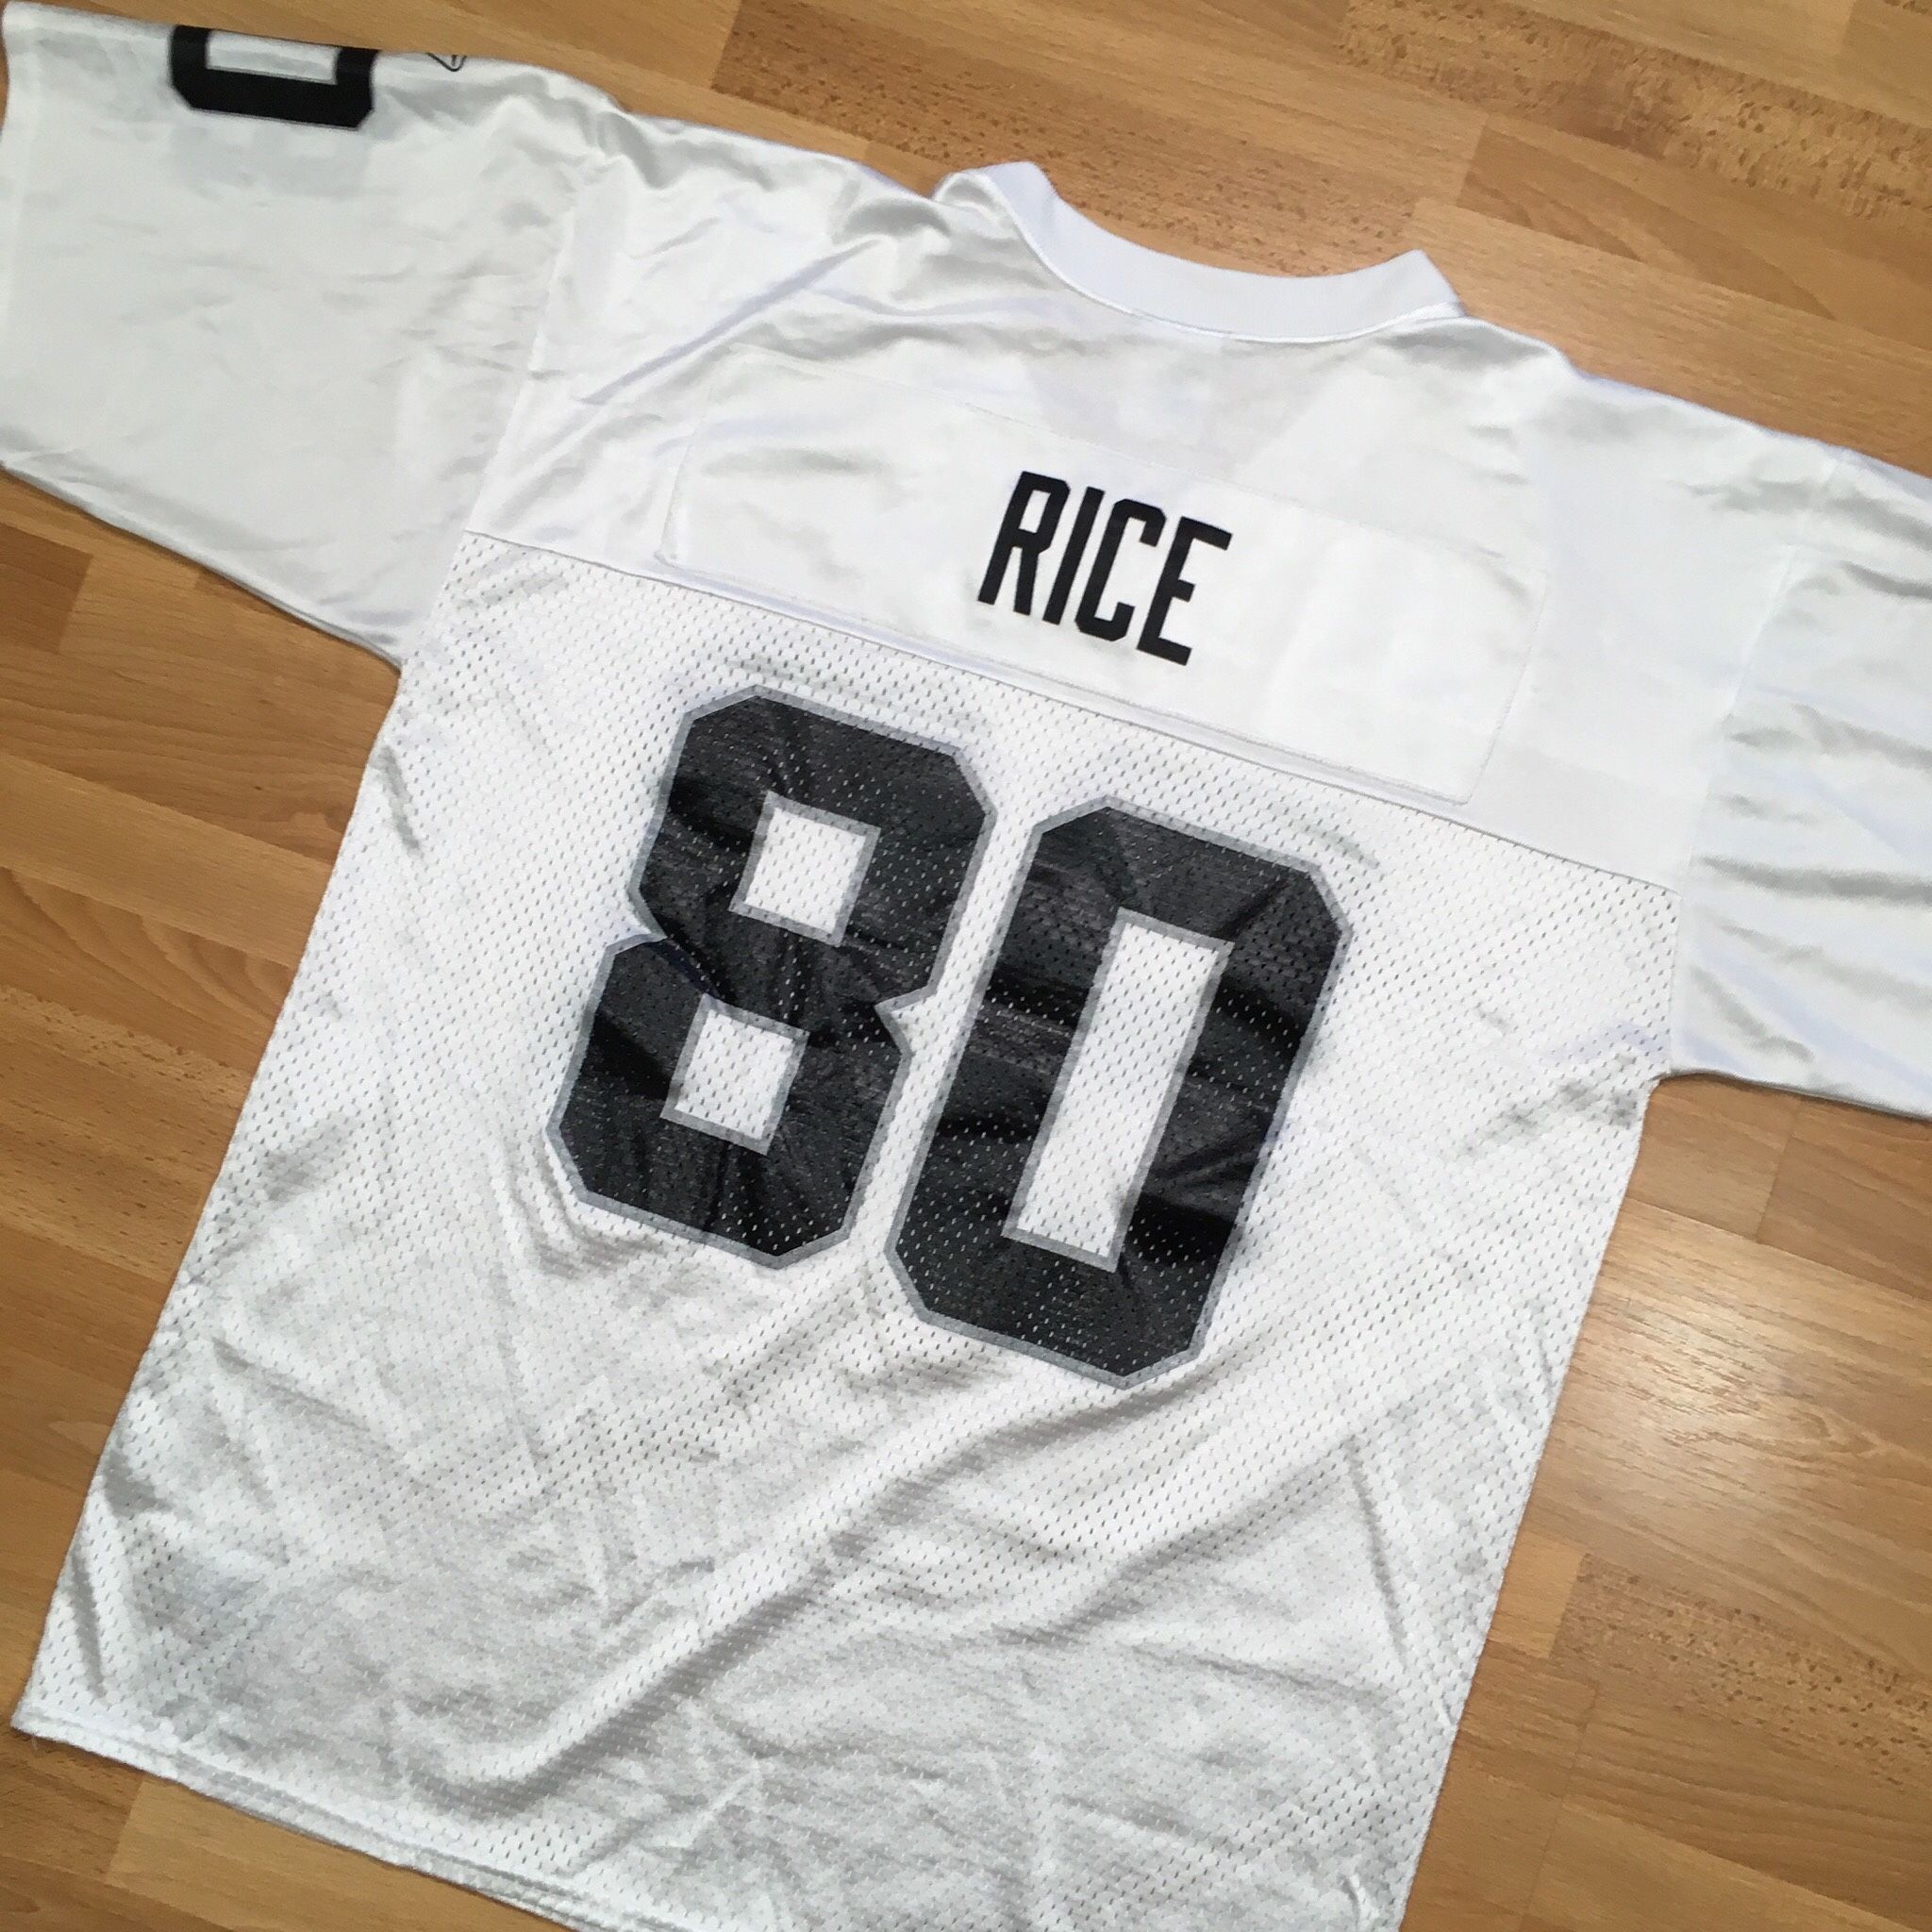 Jerry Rice Oakland Raiders Reebok Authentic Pro NFL Football Jersey L 90s 00s